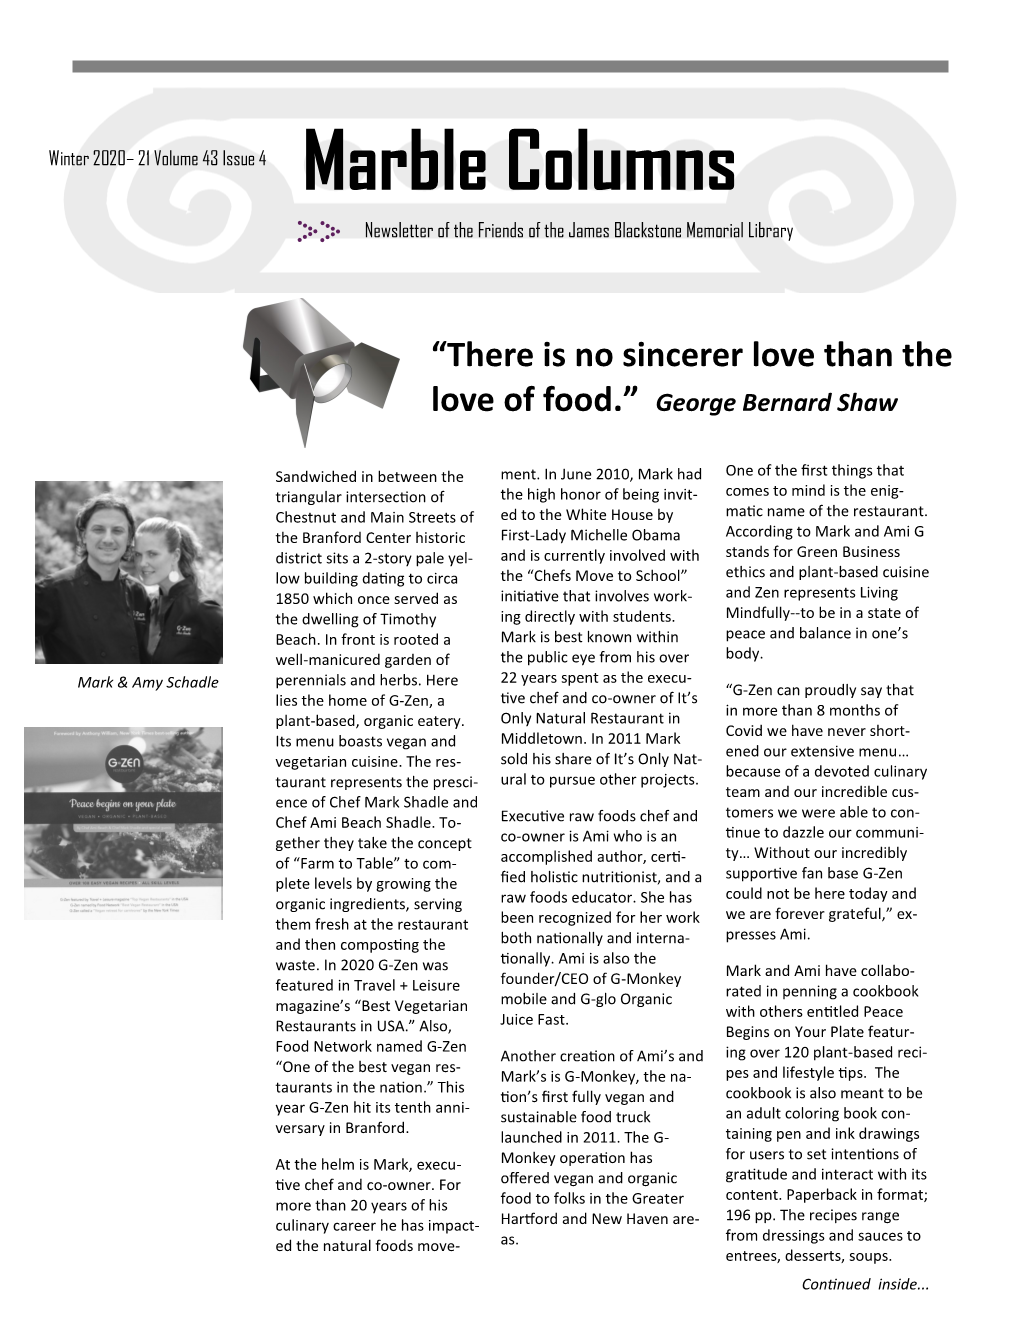 Marble Columns Newsletter of the Friends of the James Blackstone Memorial Library